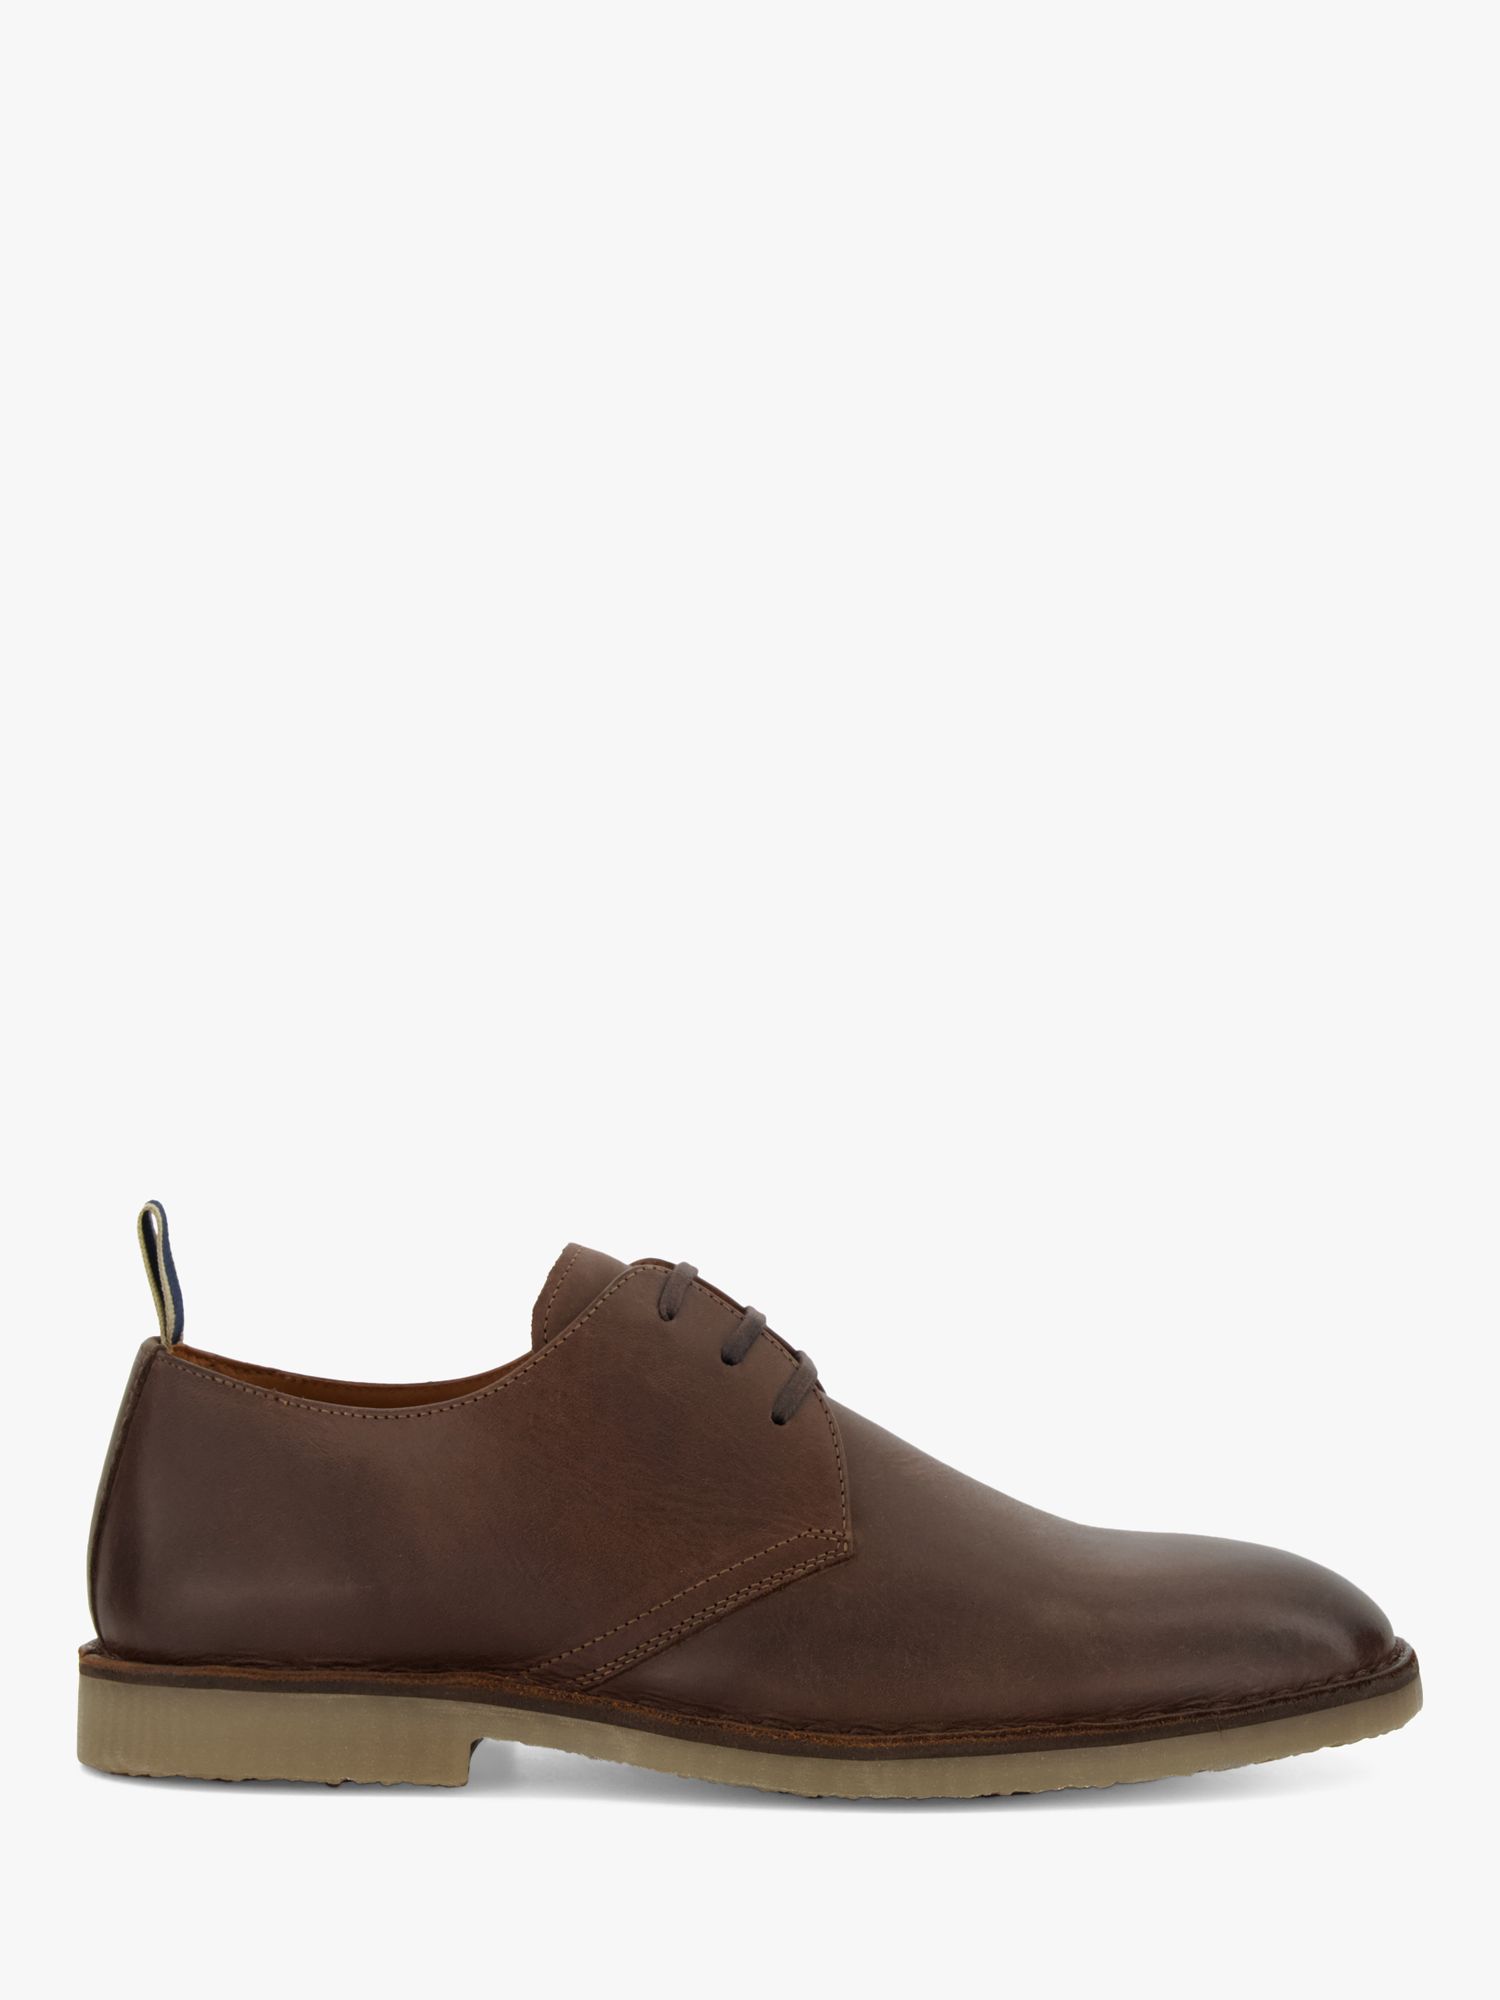 Dune Brooked Leather Chukka Shoes, Brown-leather, EU43